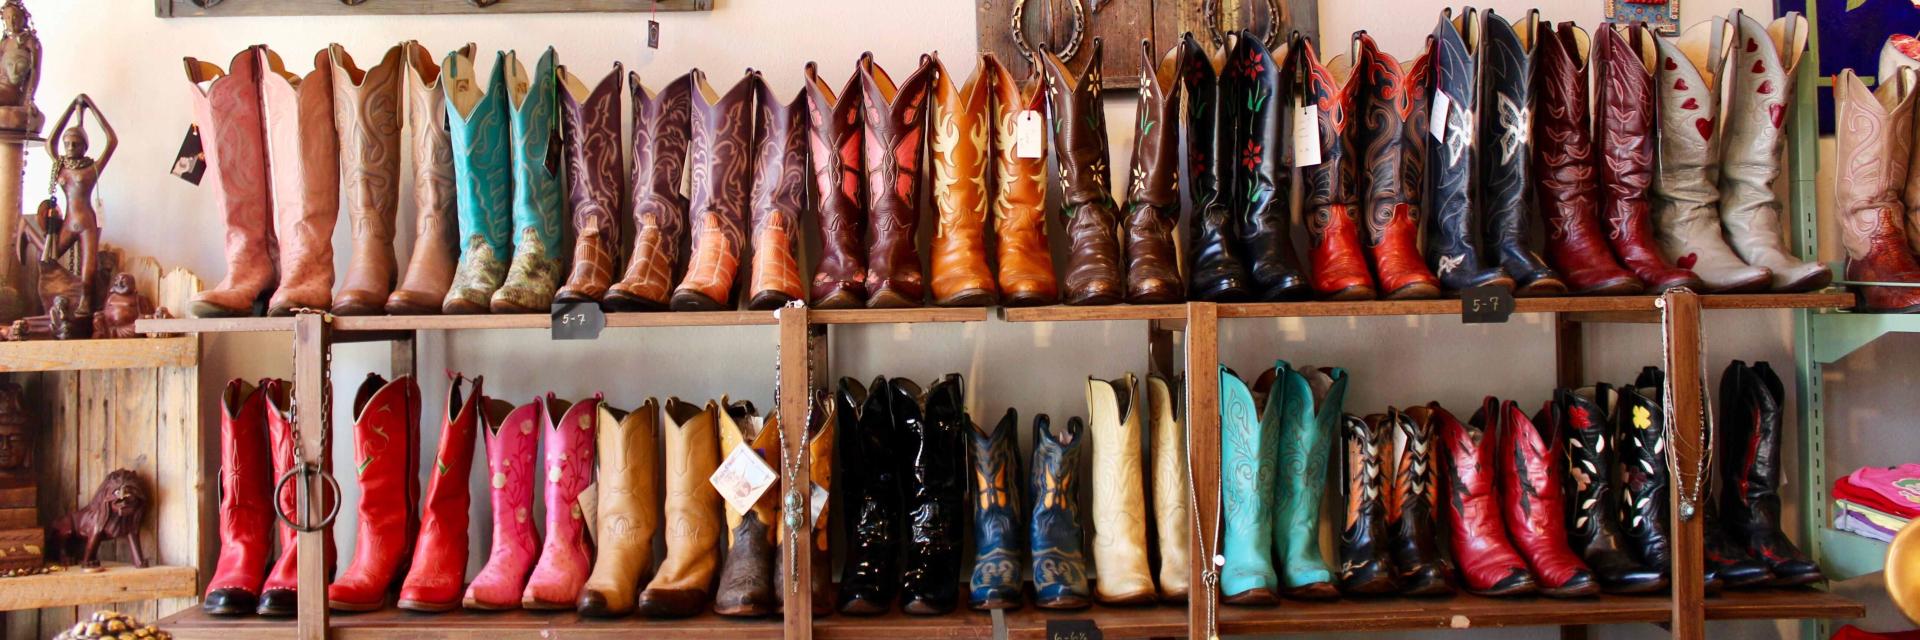 A display of vintage and secondhand boots from My Flaming Heart, a handmade and vintage boutique store in Houston Texas, USA.